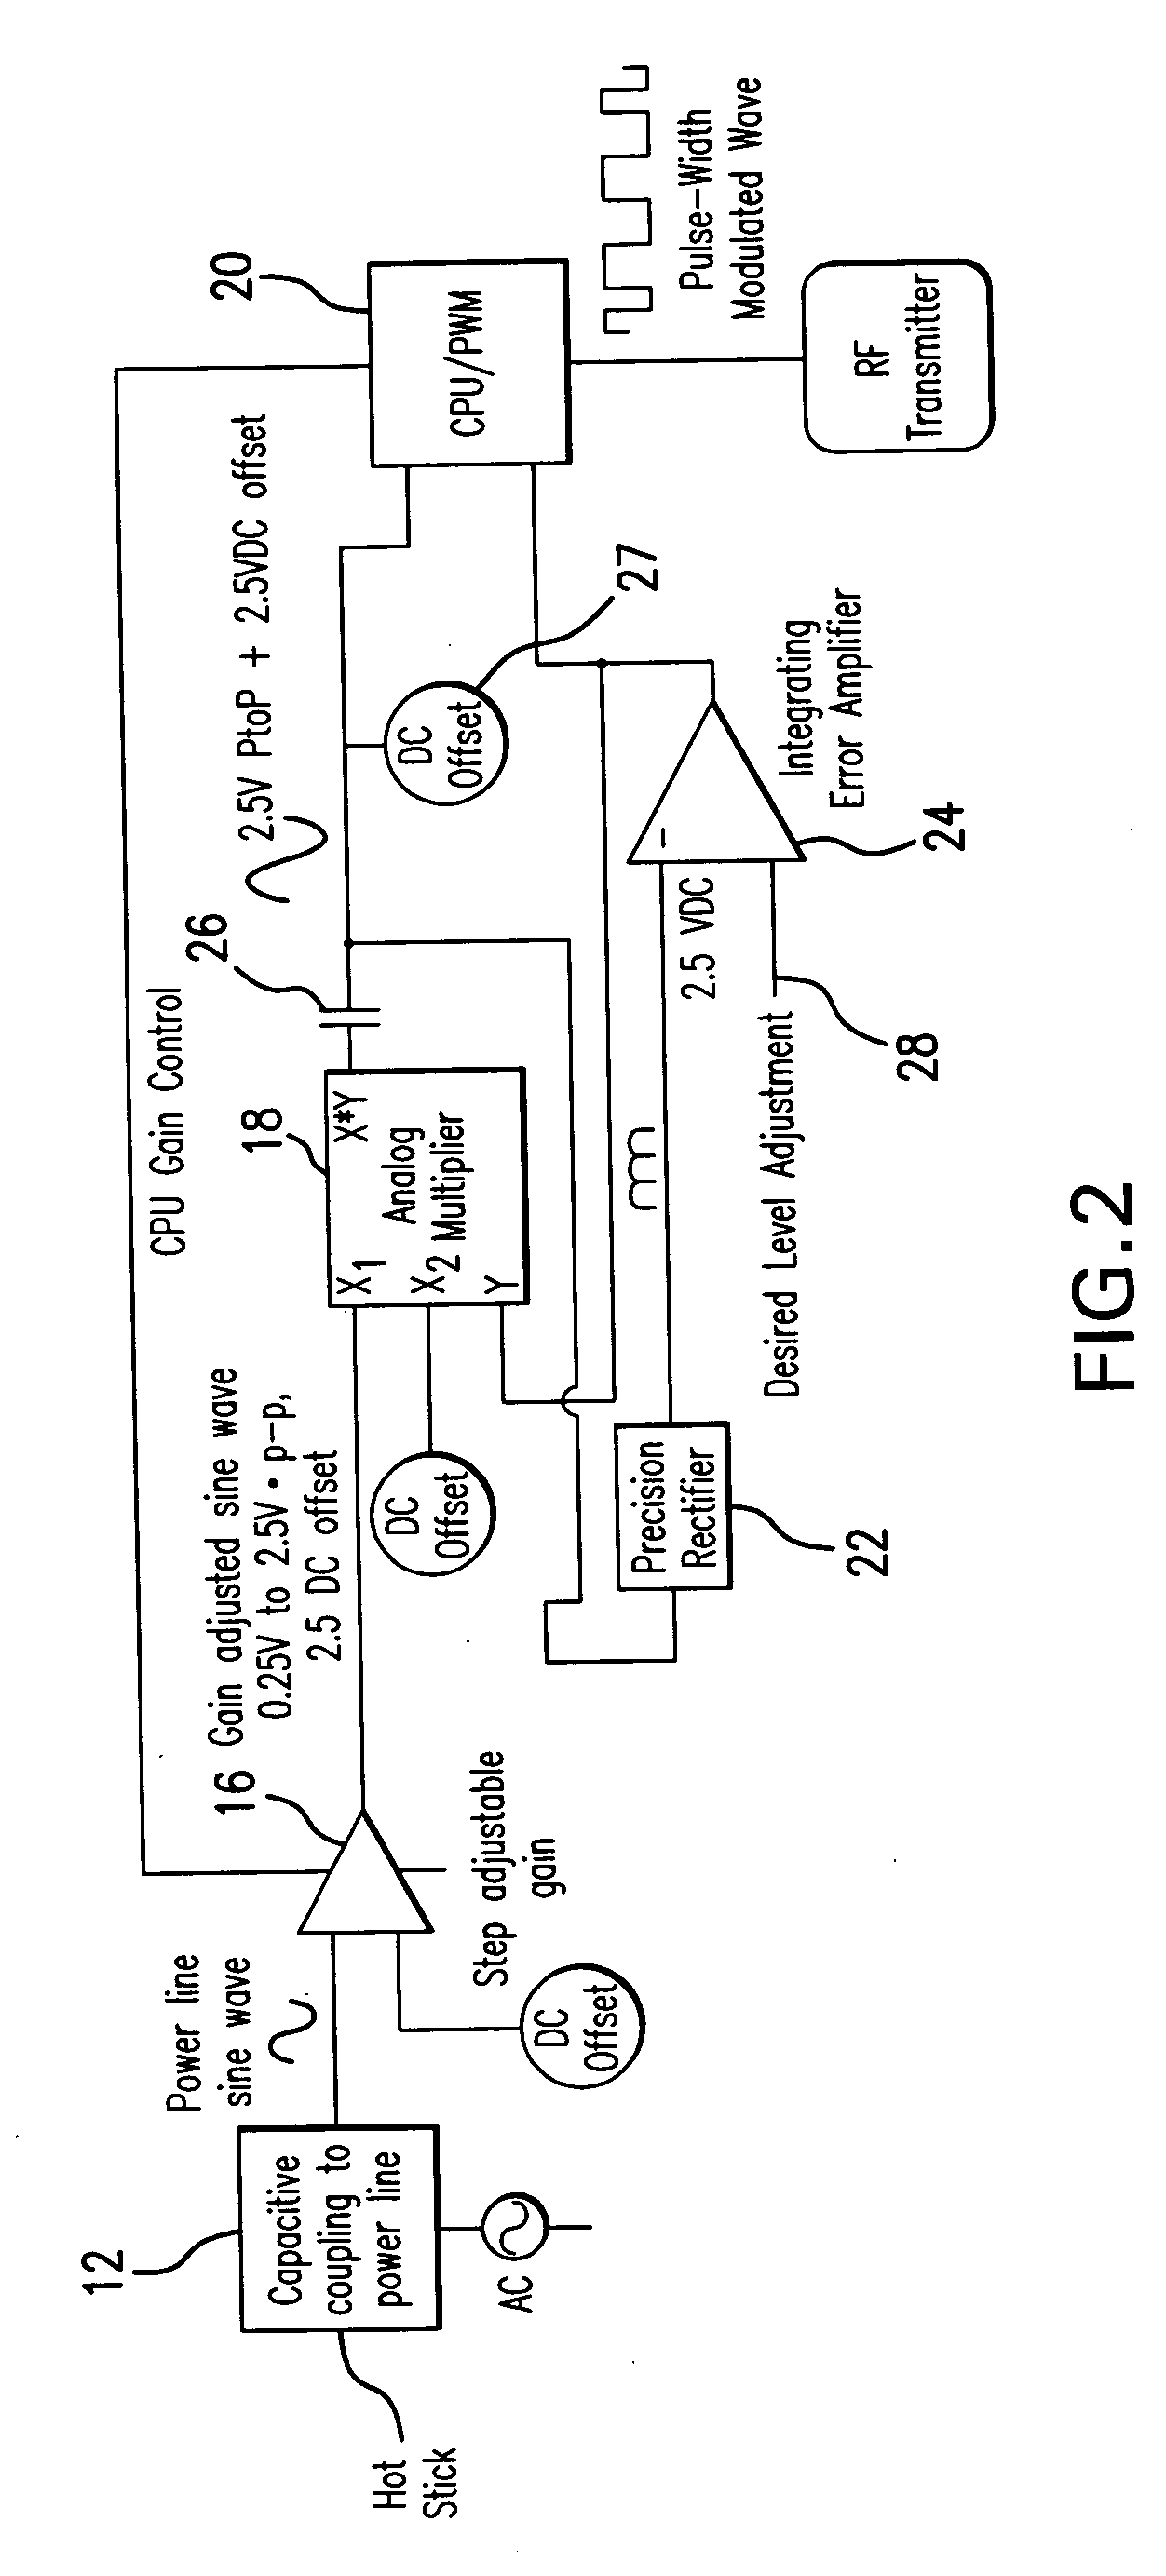 Phase identification apparatus having automatic gain control to prevent detector saturation